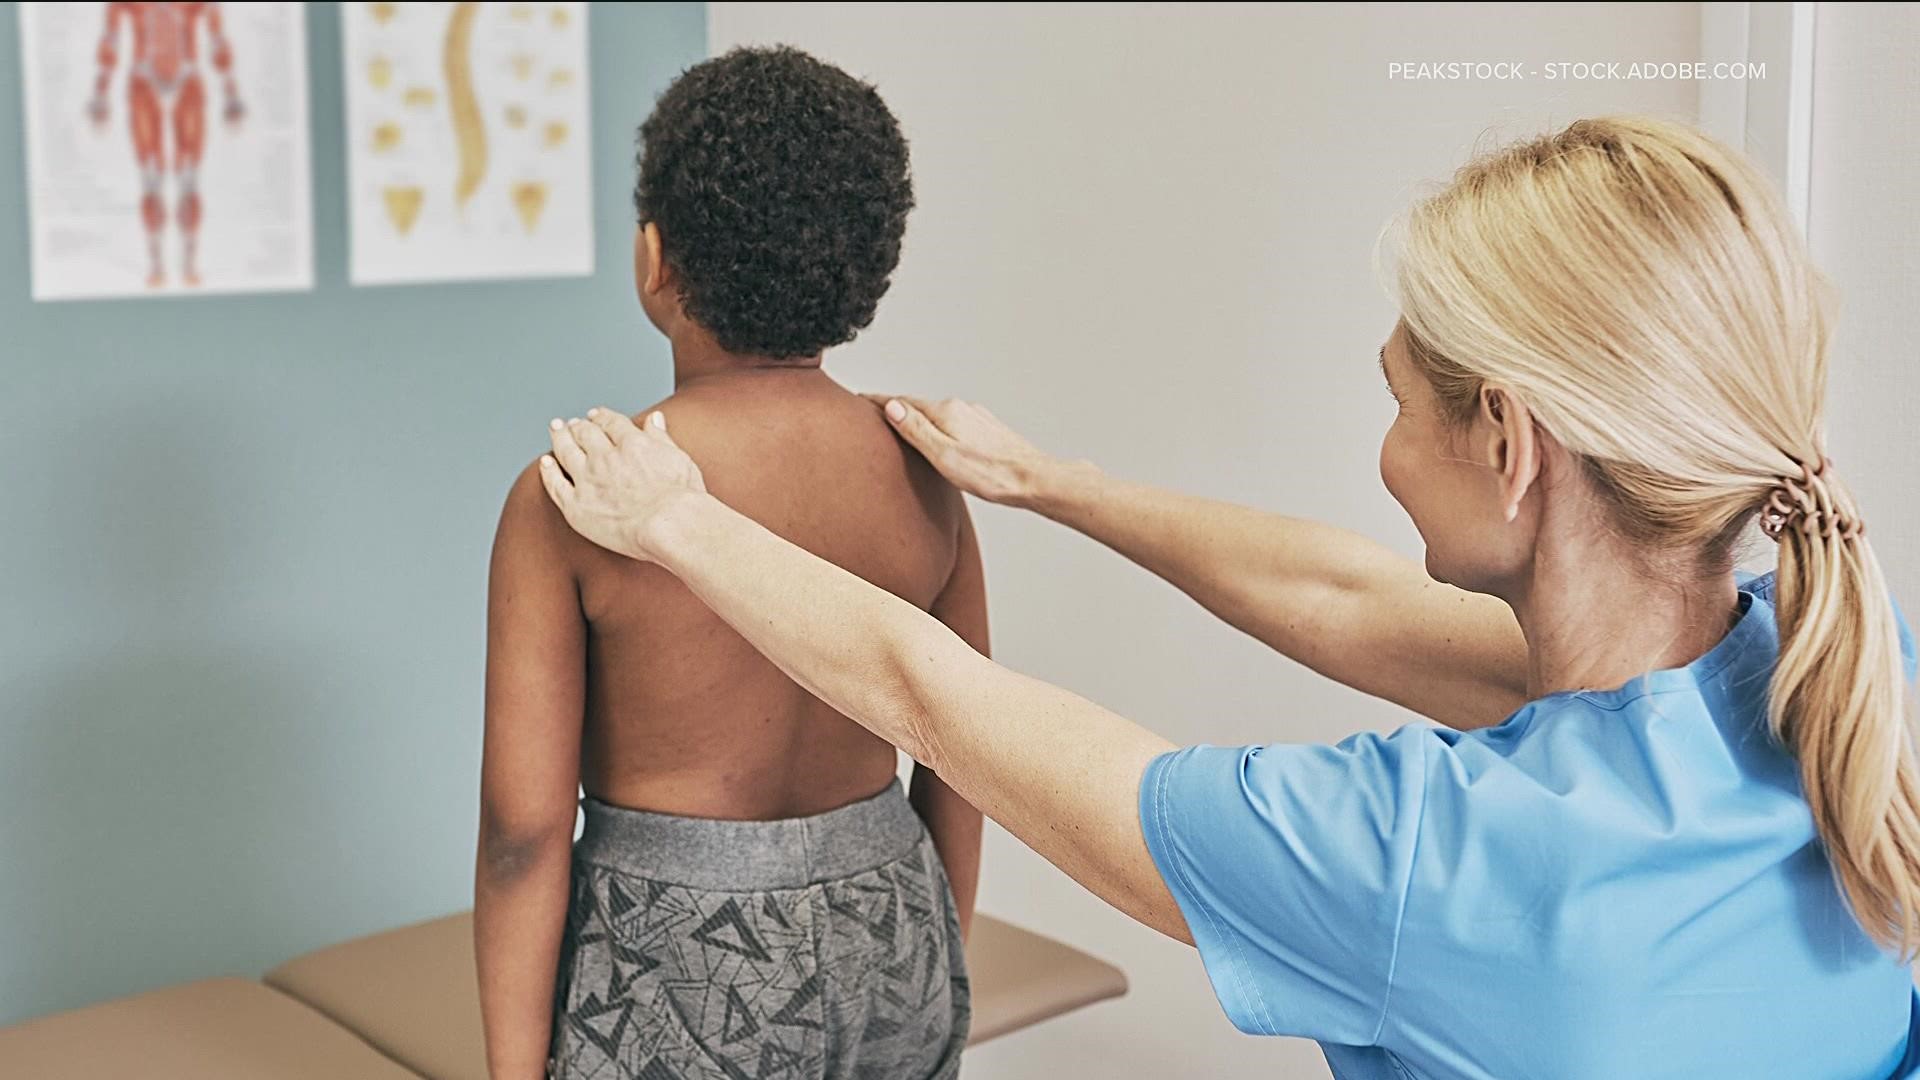 Parents should make it a routine to see a doctor and check your child's back.